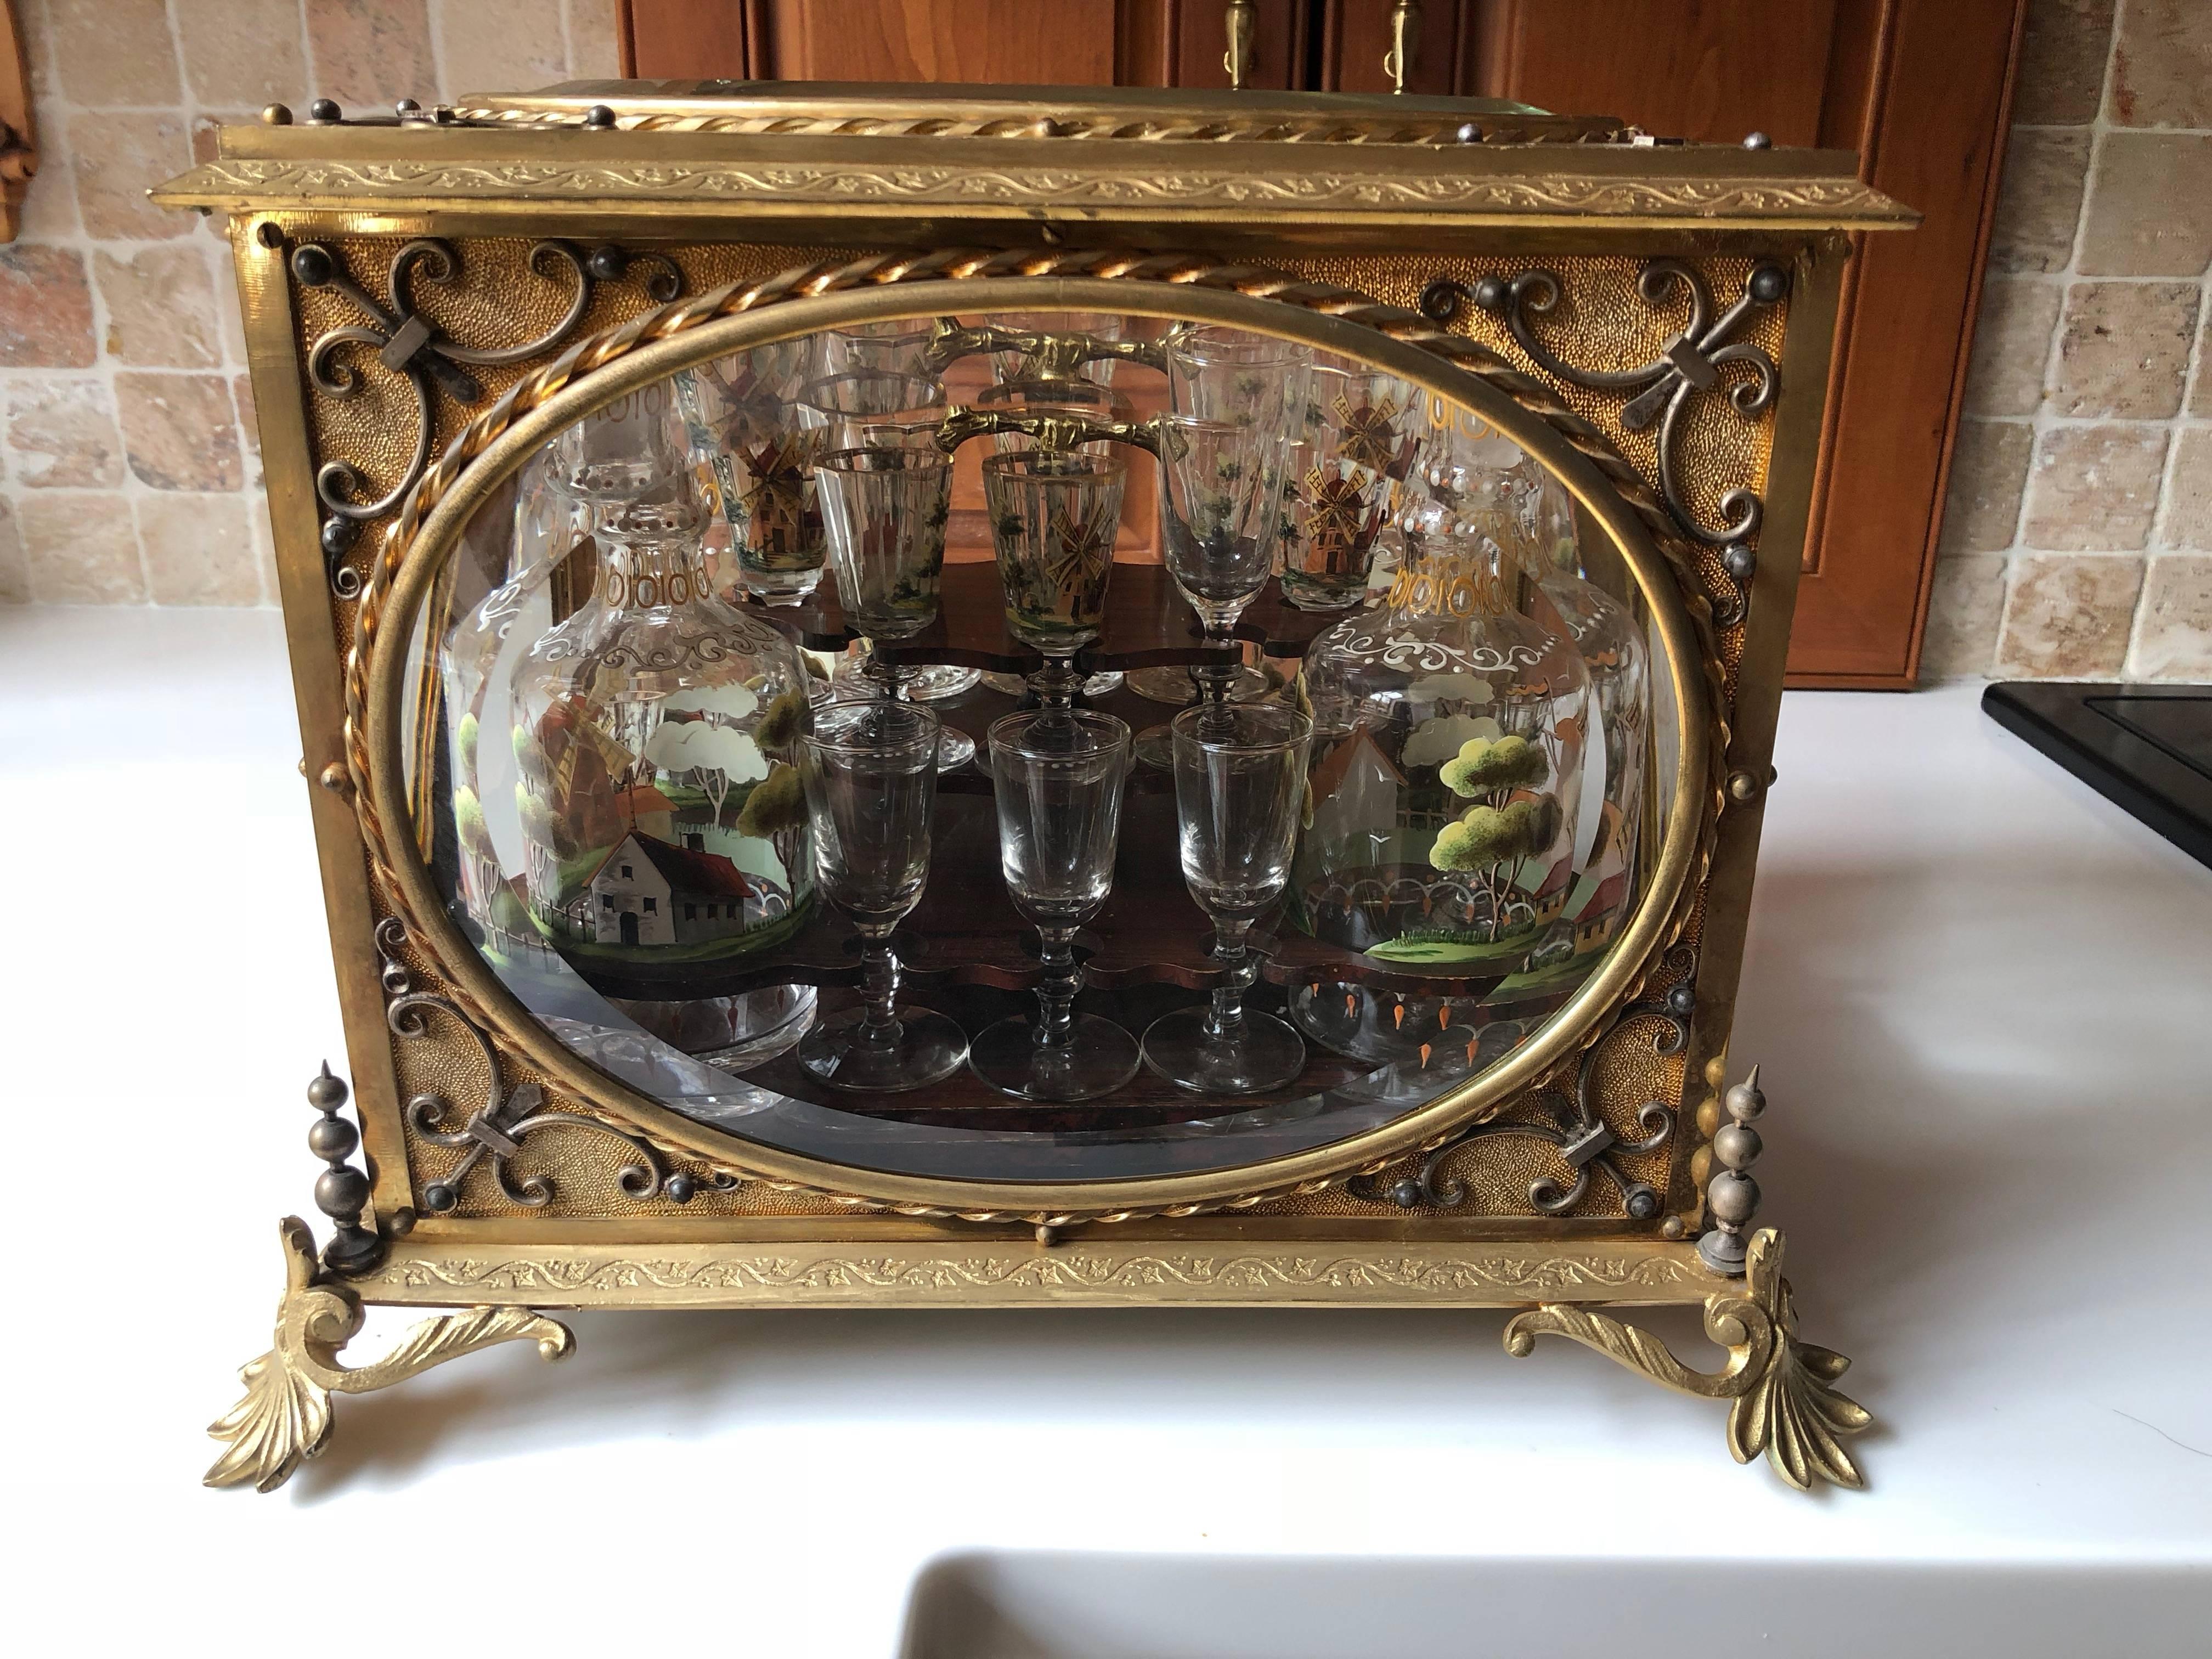 Rare 19th century antique Tantalus, beautiful hand-painted glasses
Measures: 16 glasses 3 inches H
Eight bottles 8 inches H
Four glasses are not painted.